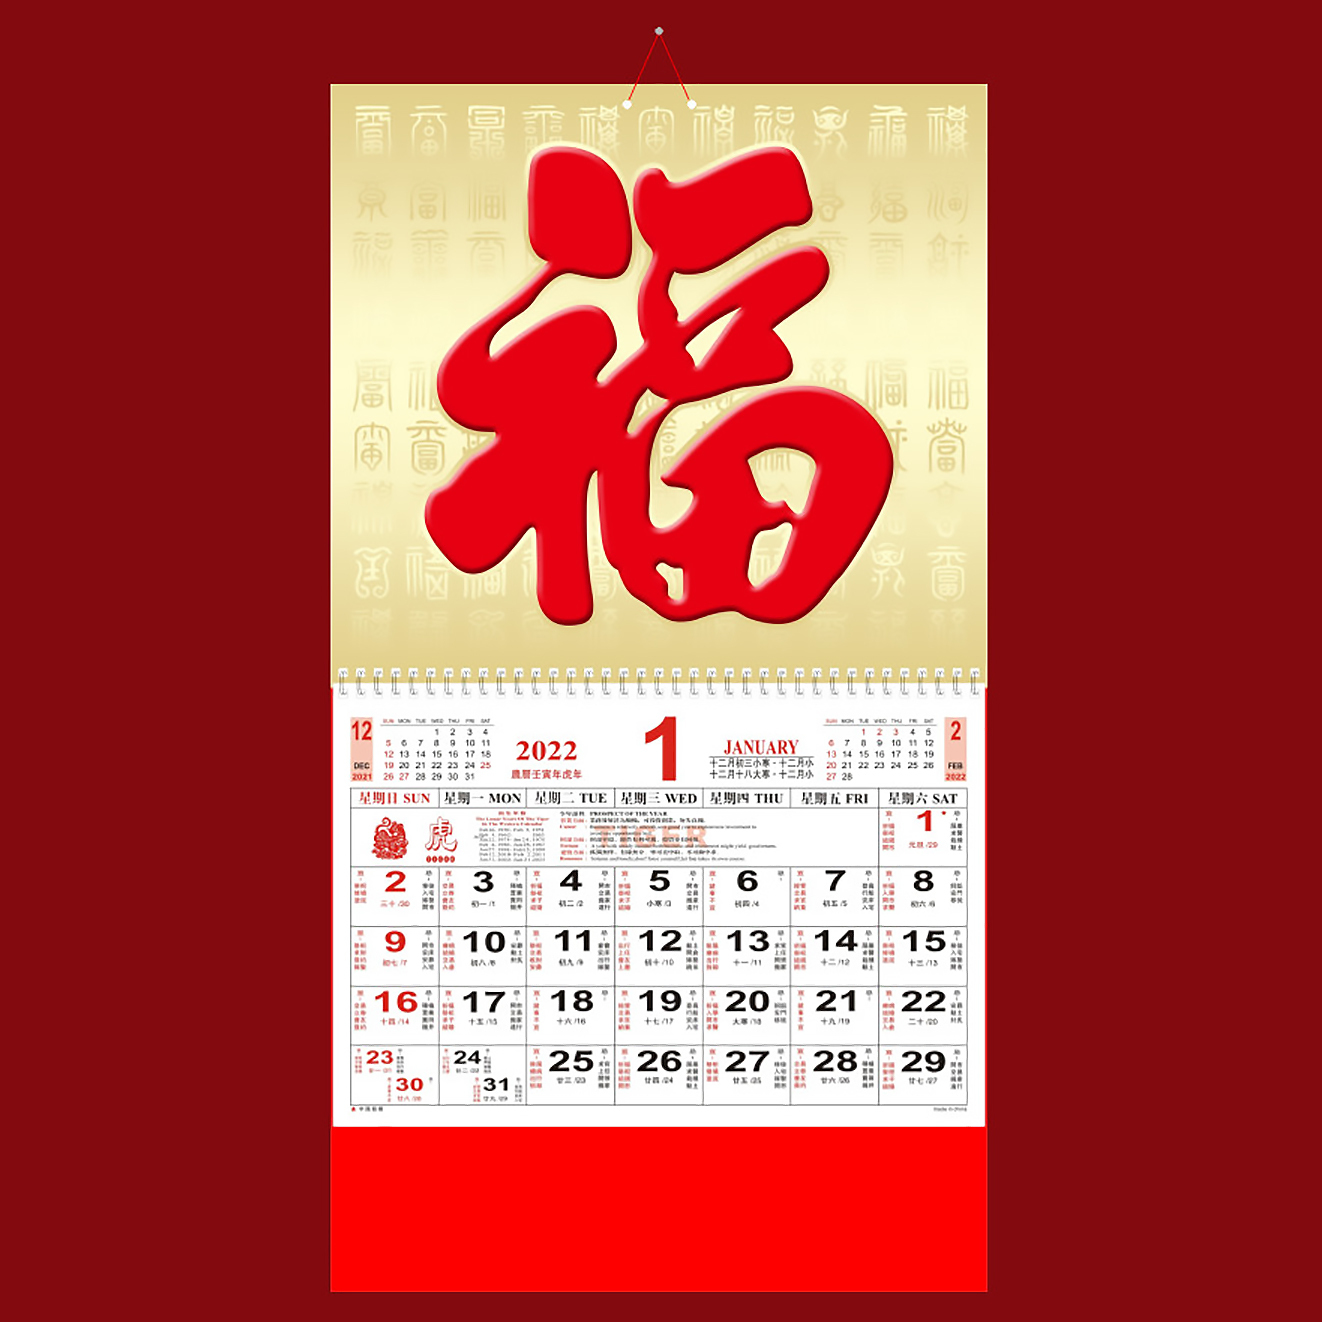 2021 Calendar Chinese Lunar Large Wall Luck on Gold Background | eBay